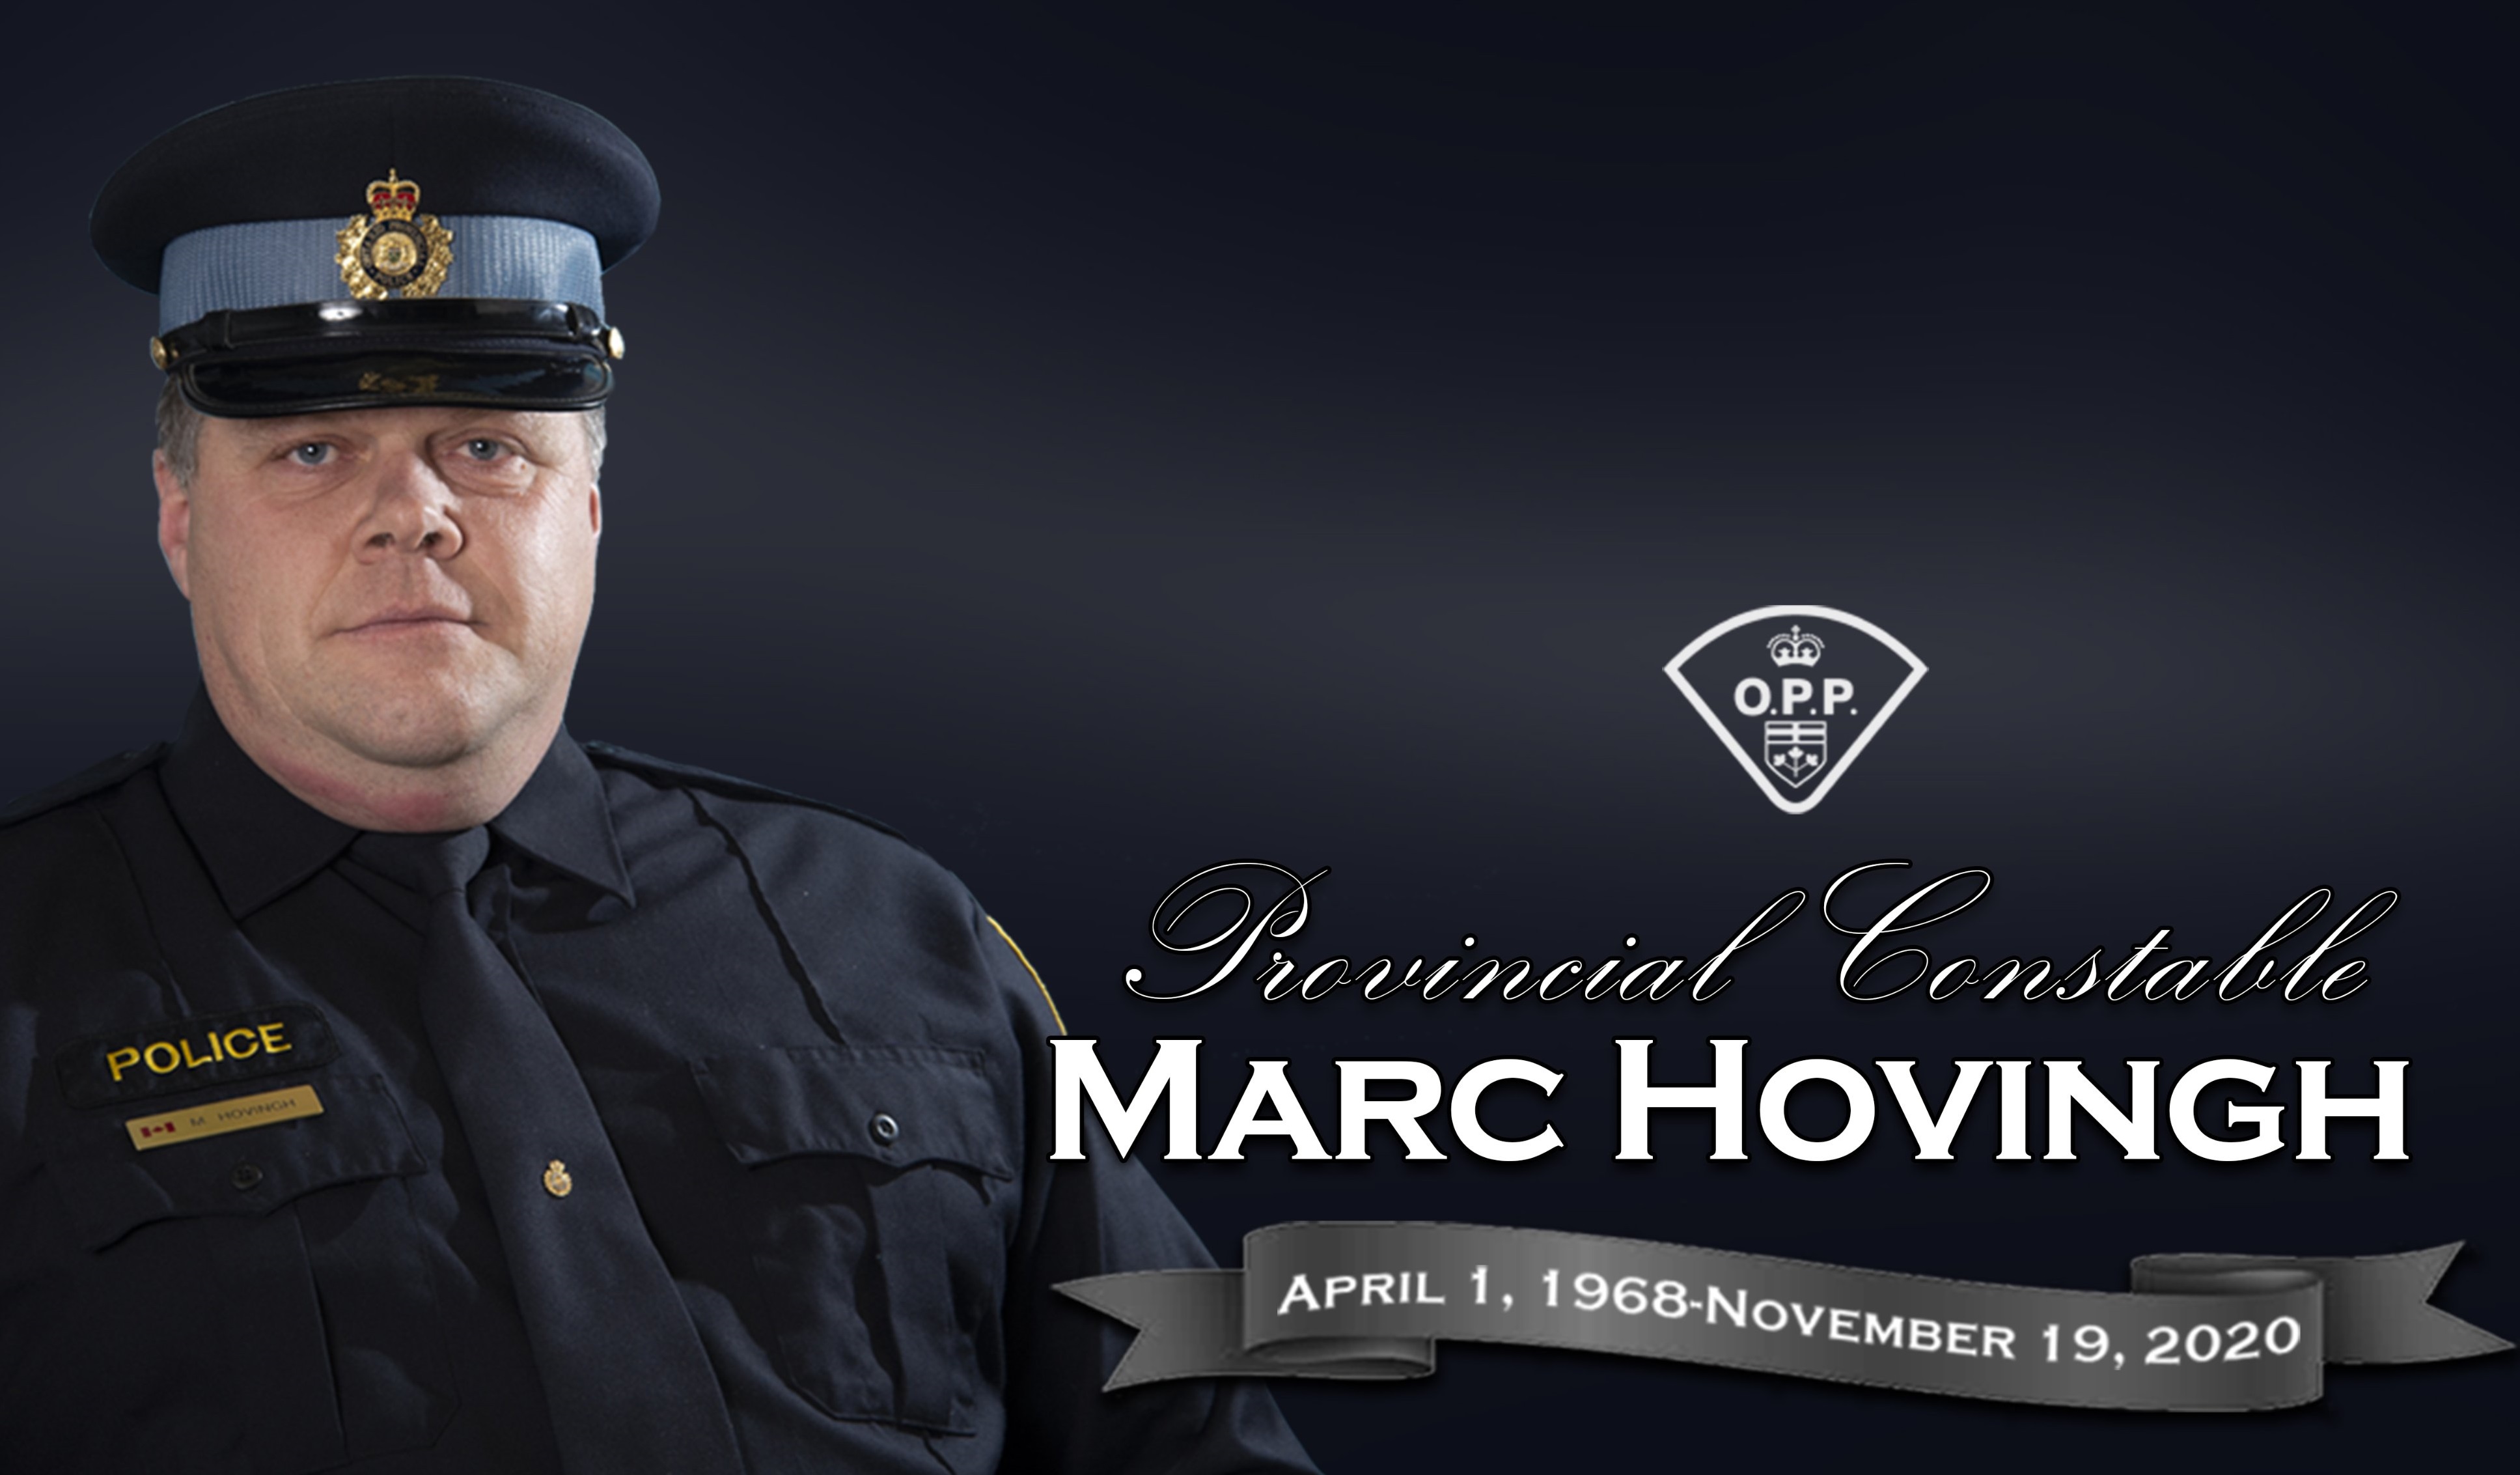 REPLAY: Provincial Constable Marc Hovingh will be laid to rest today -  Timmins News